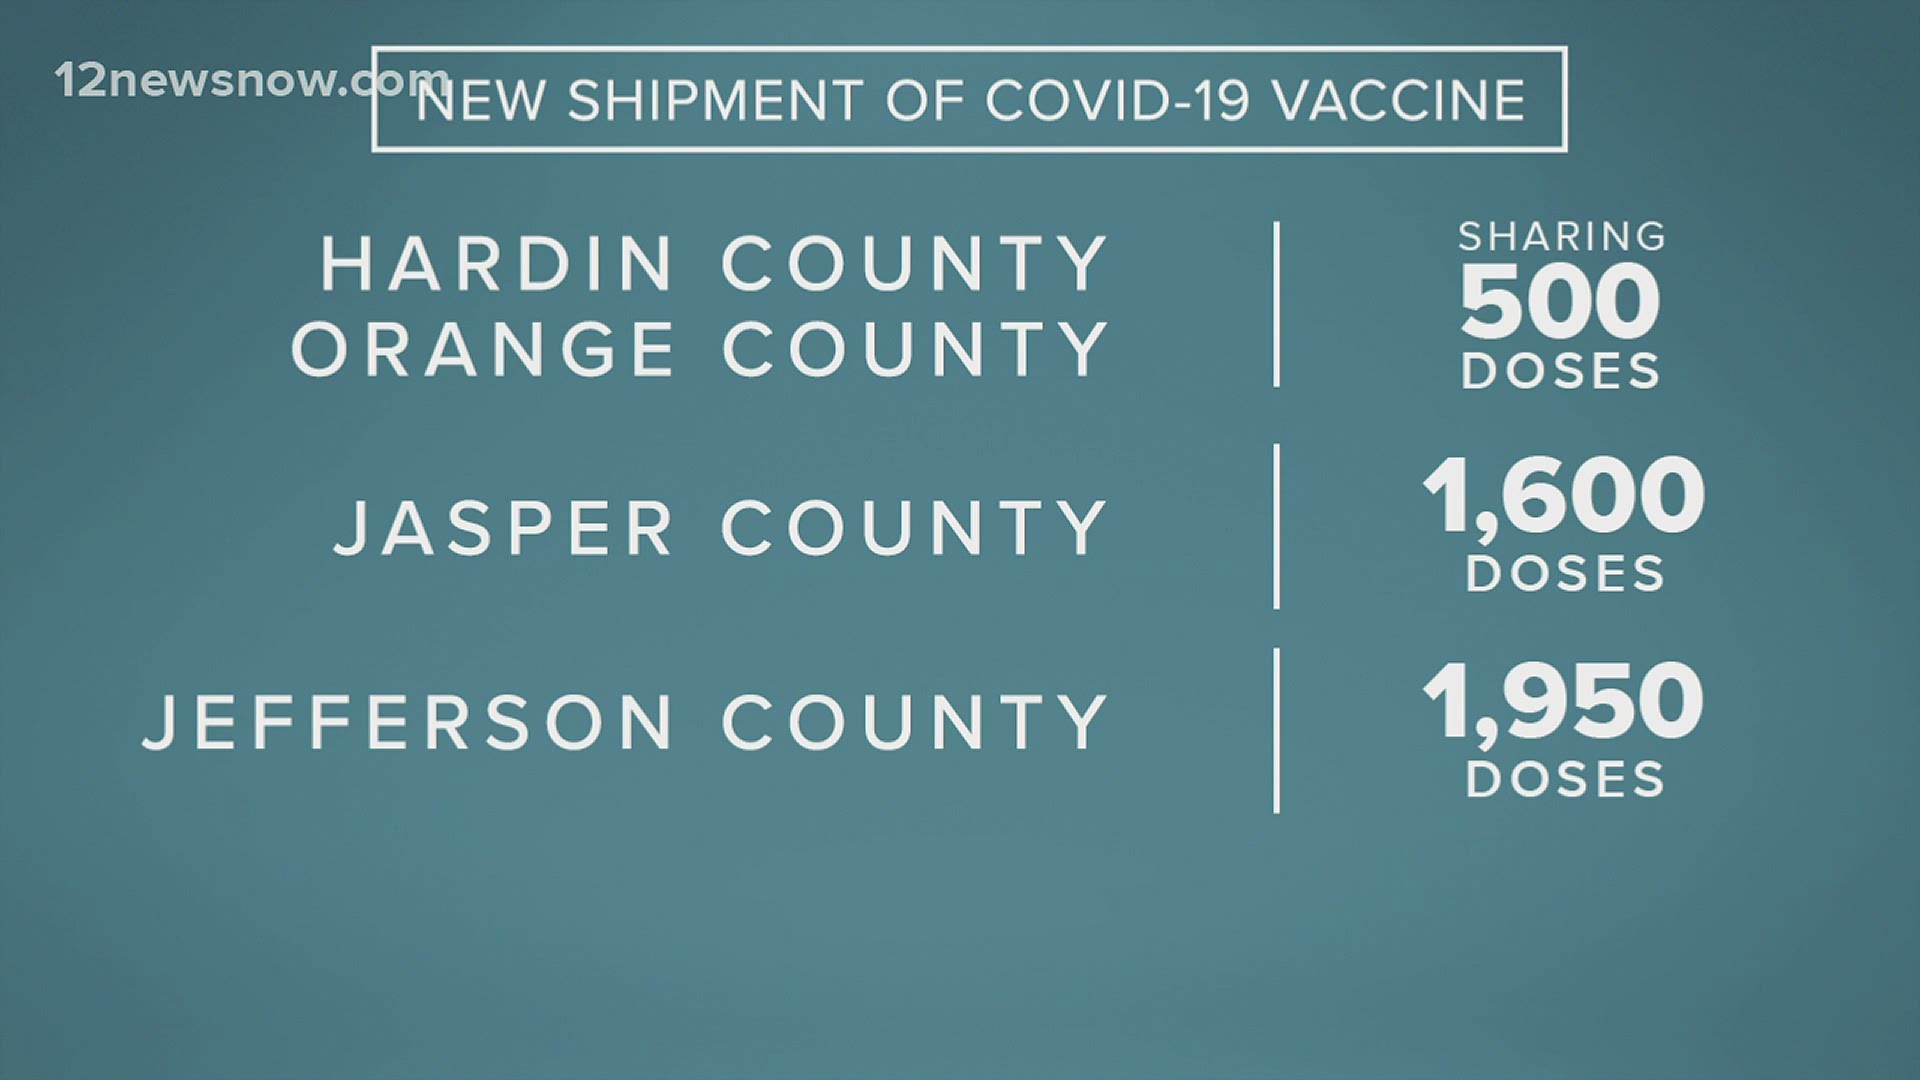 More than 4,000 doses of the COVID-19 vaccine will in Southeast Texas next week.